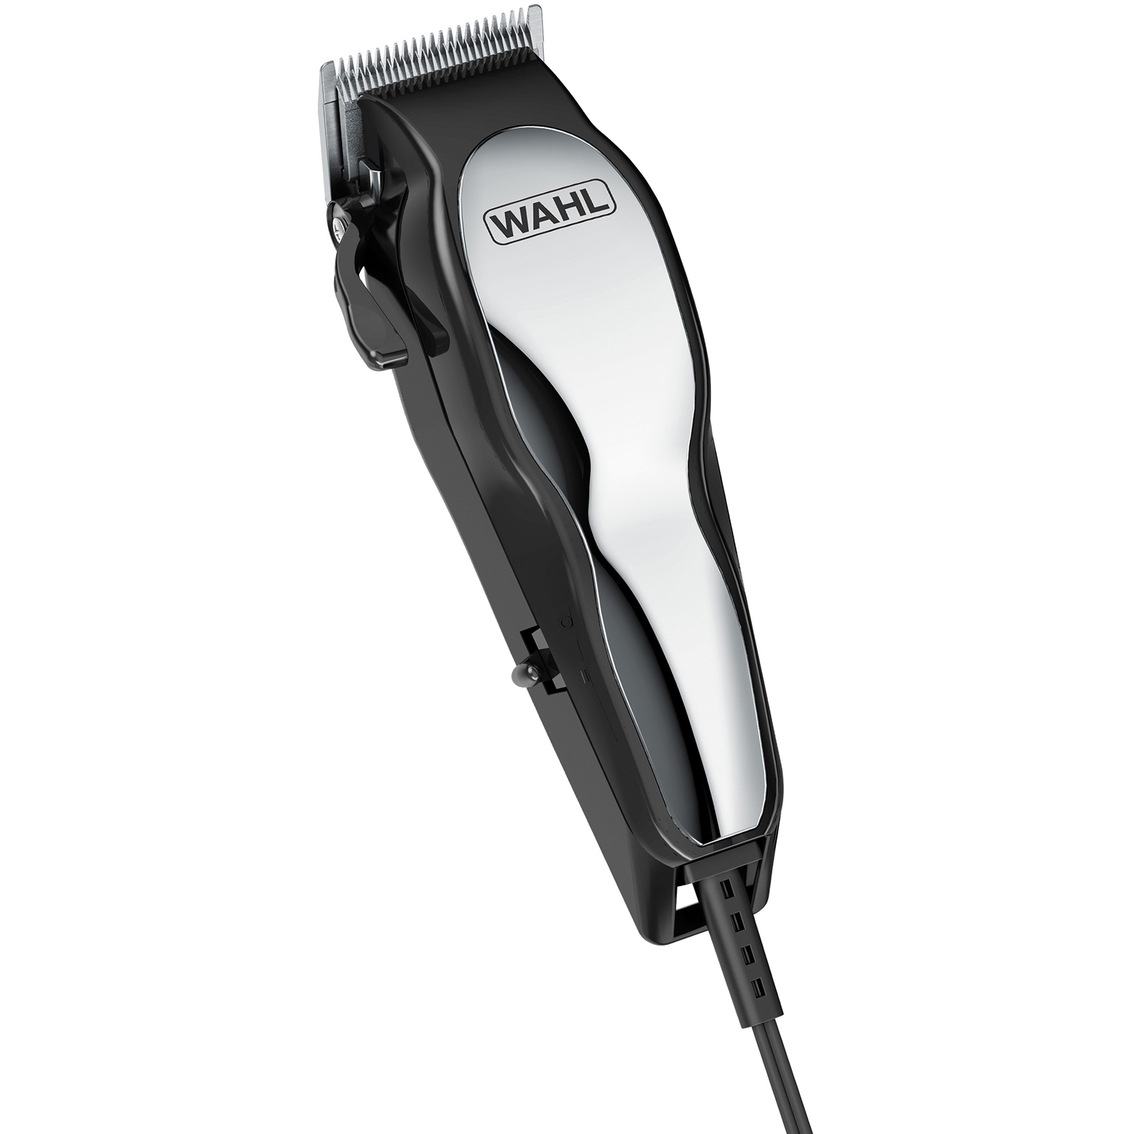 Wahl Chrome Pro Haircutting Clipper Kit - Image 2 of 3